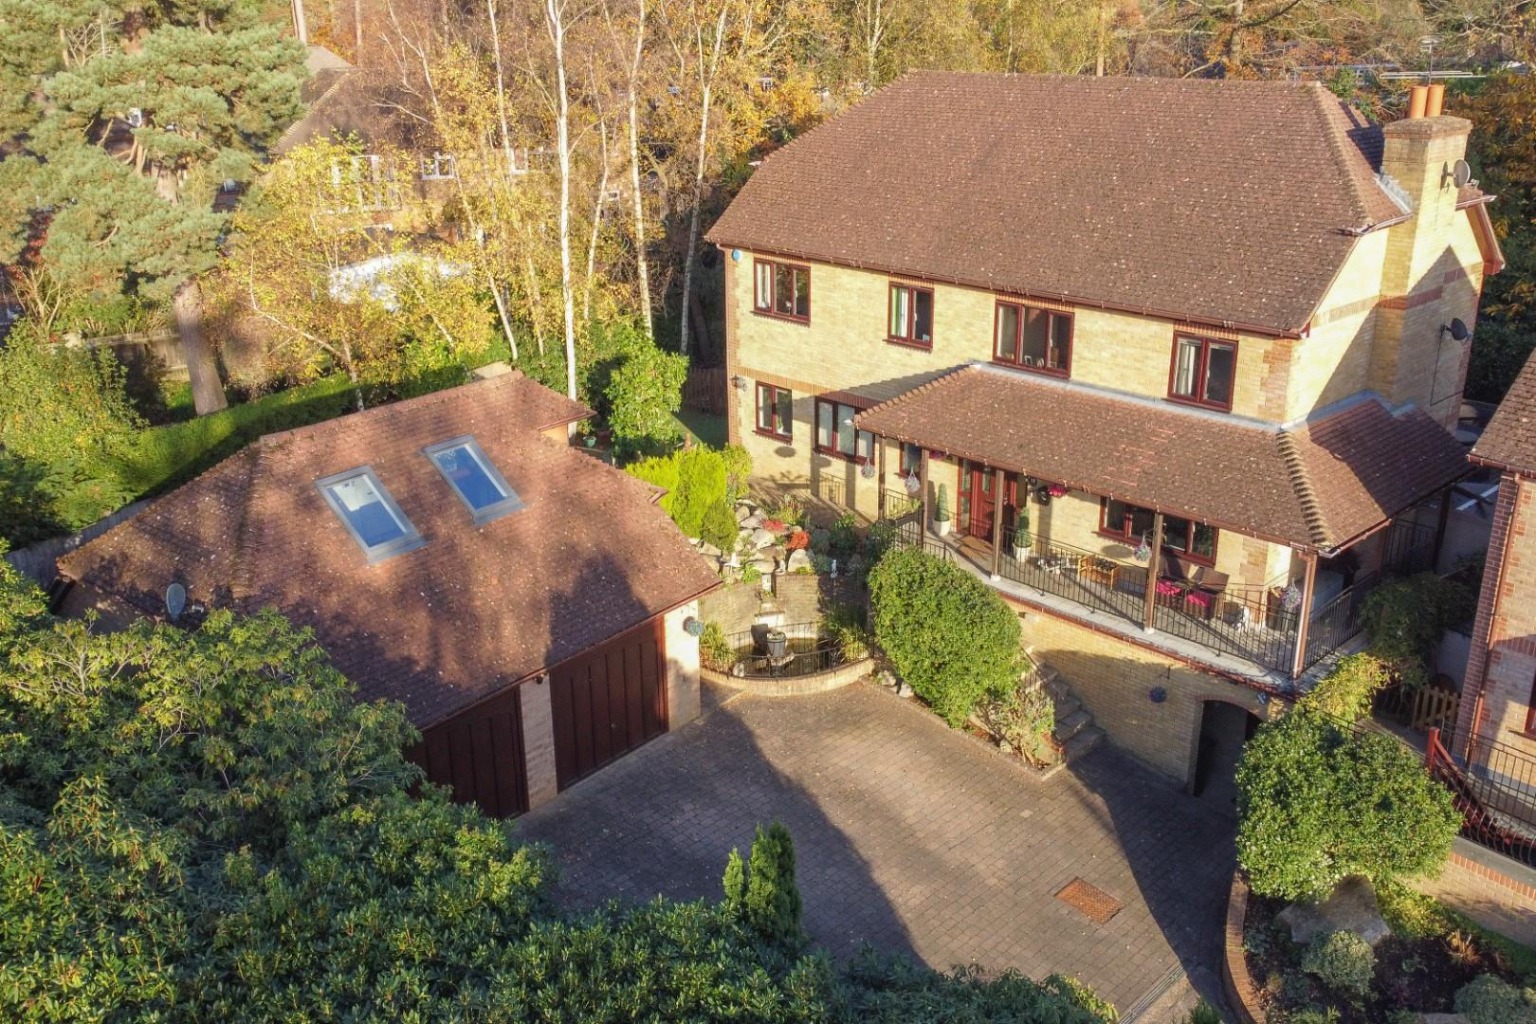 A simply amazing family home, offering accommodation approaching 4750 square feet!  Situated at the top of a cul-de-sac location offering great privacy and seclusion, yet within just a short distance of Camberley town centre and local schools.